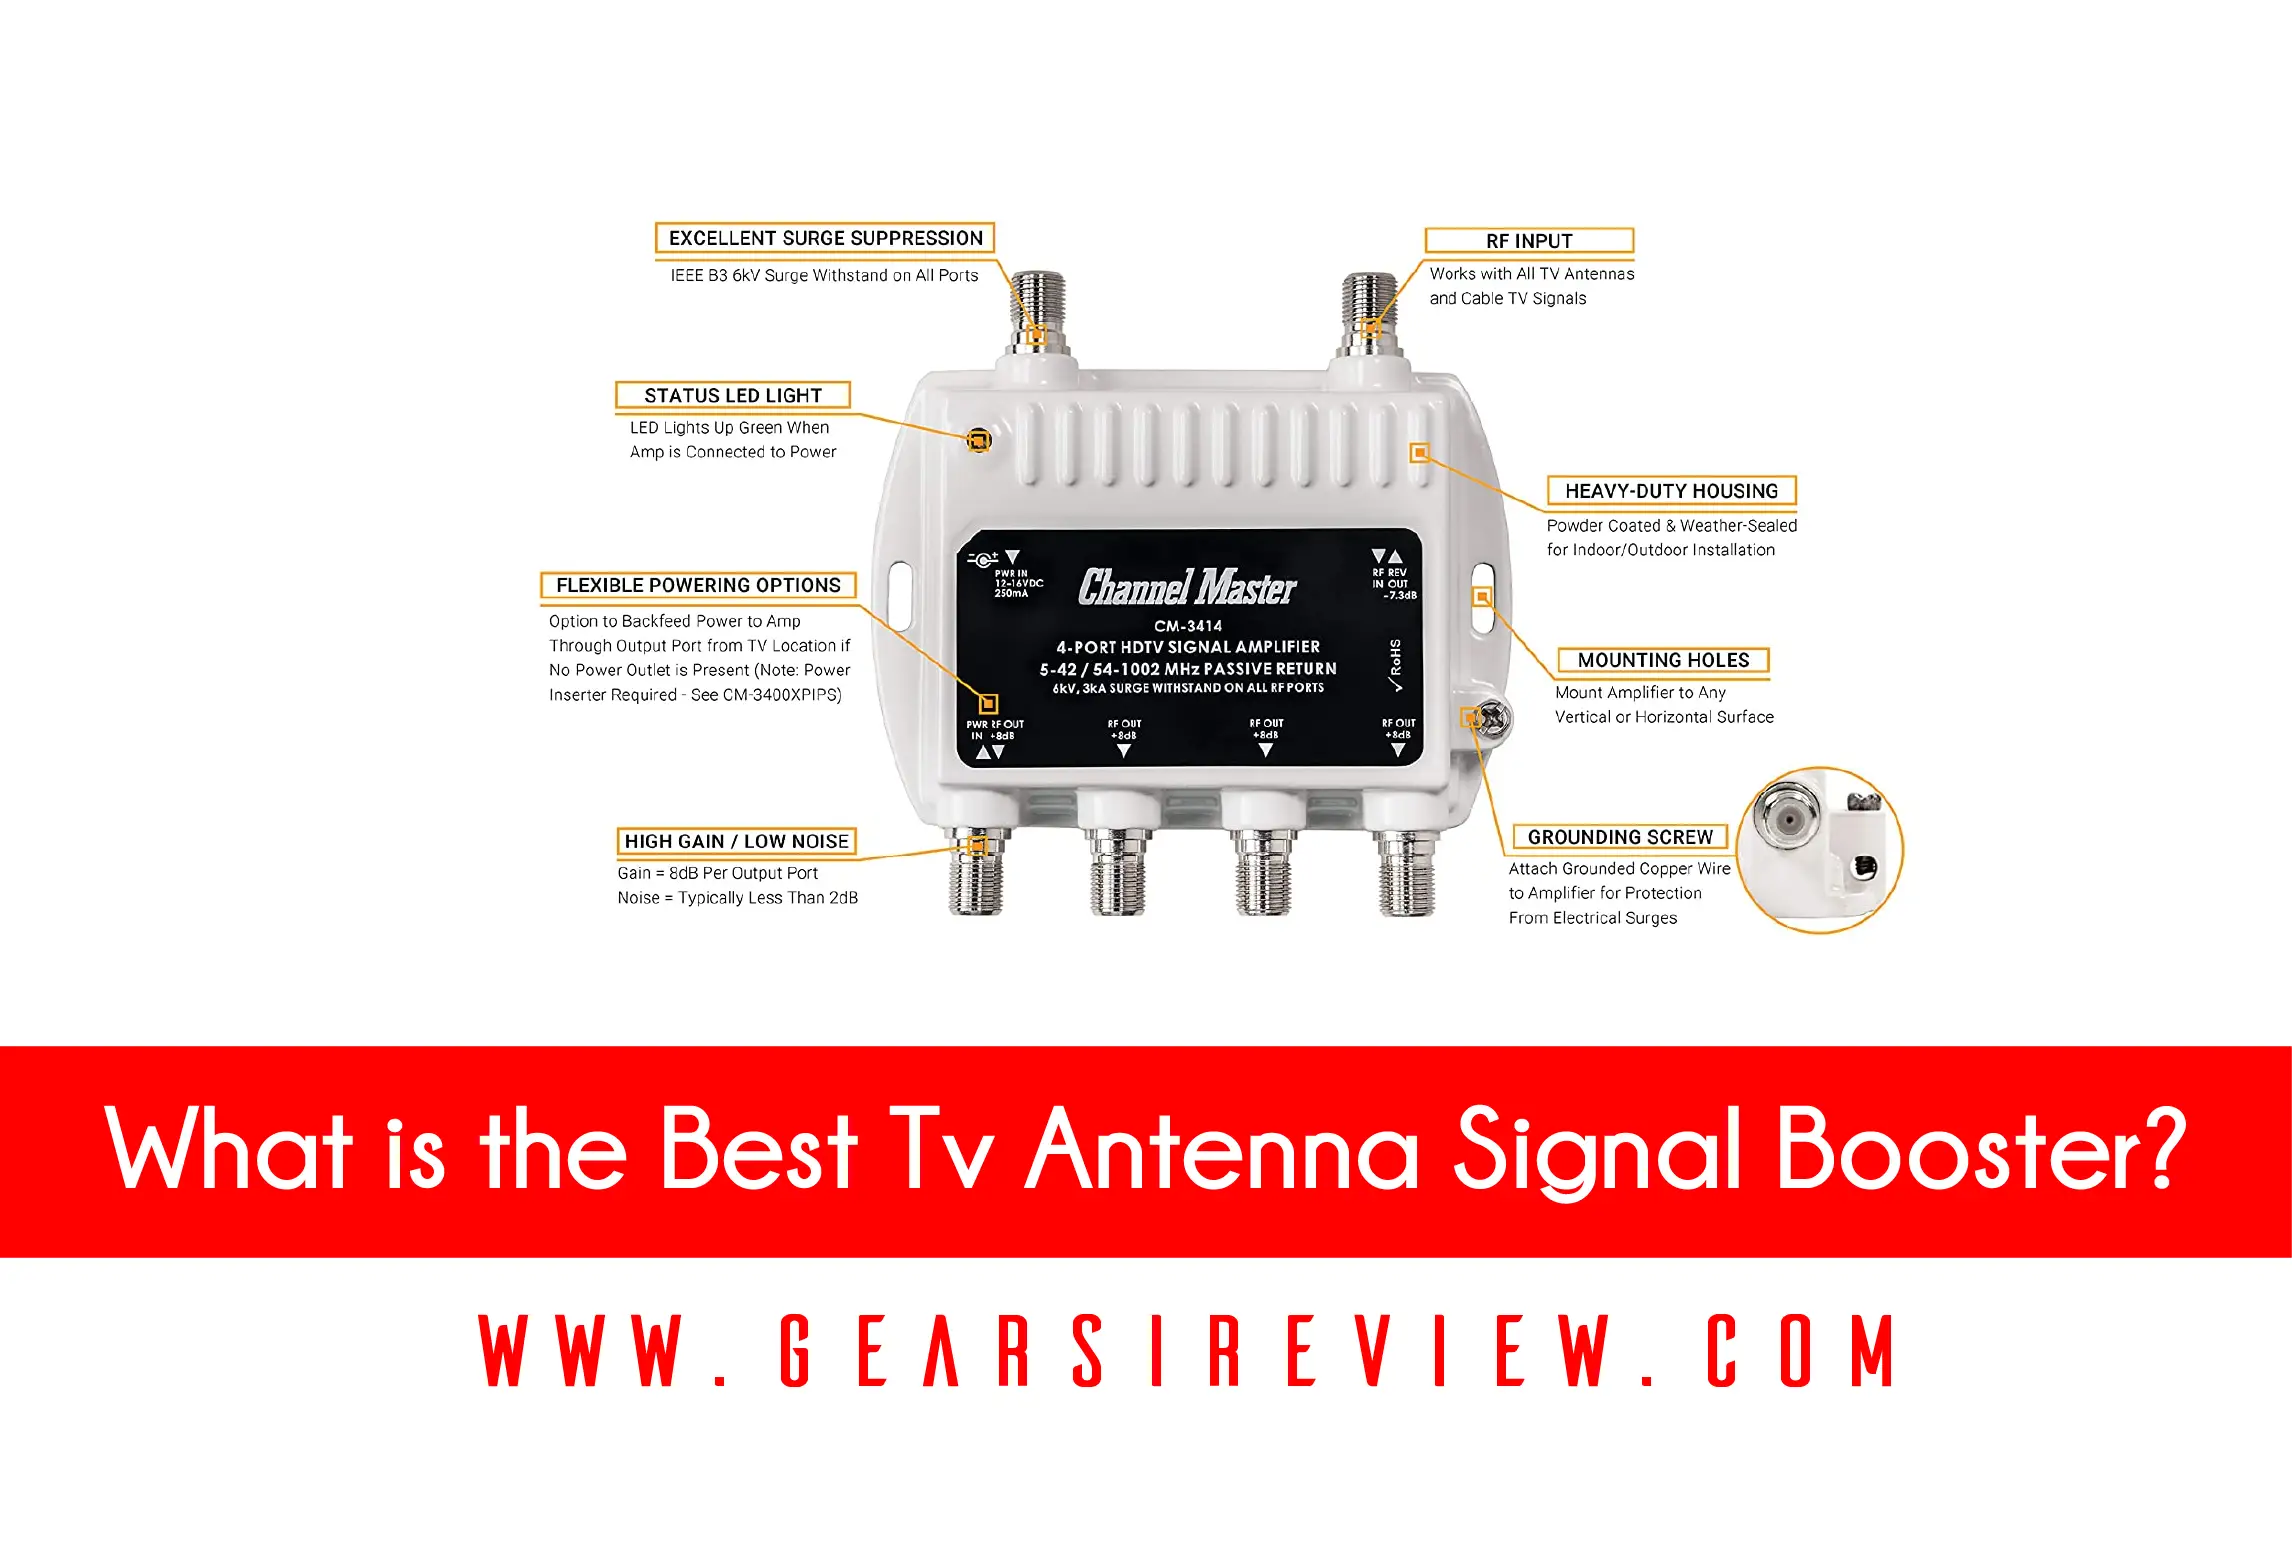 What is the Best Tv Antenna Signal Booster